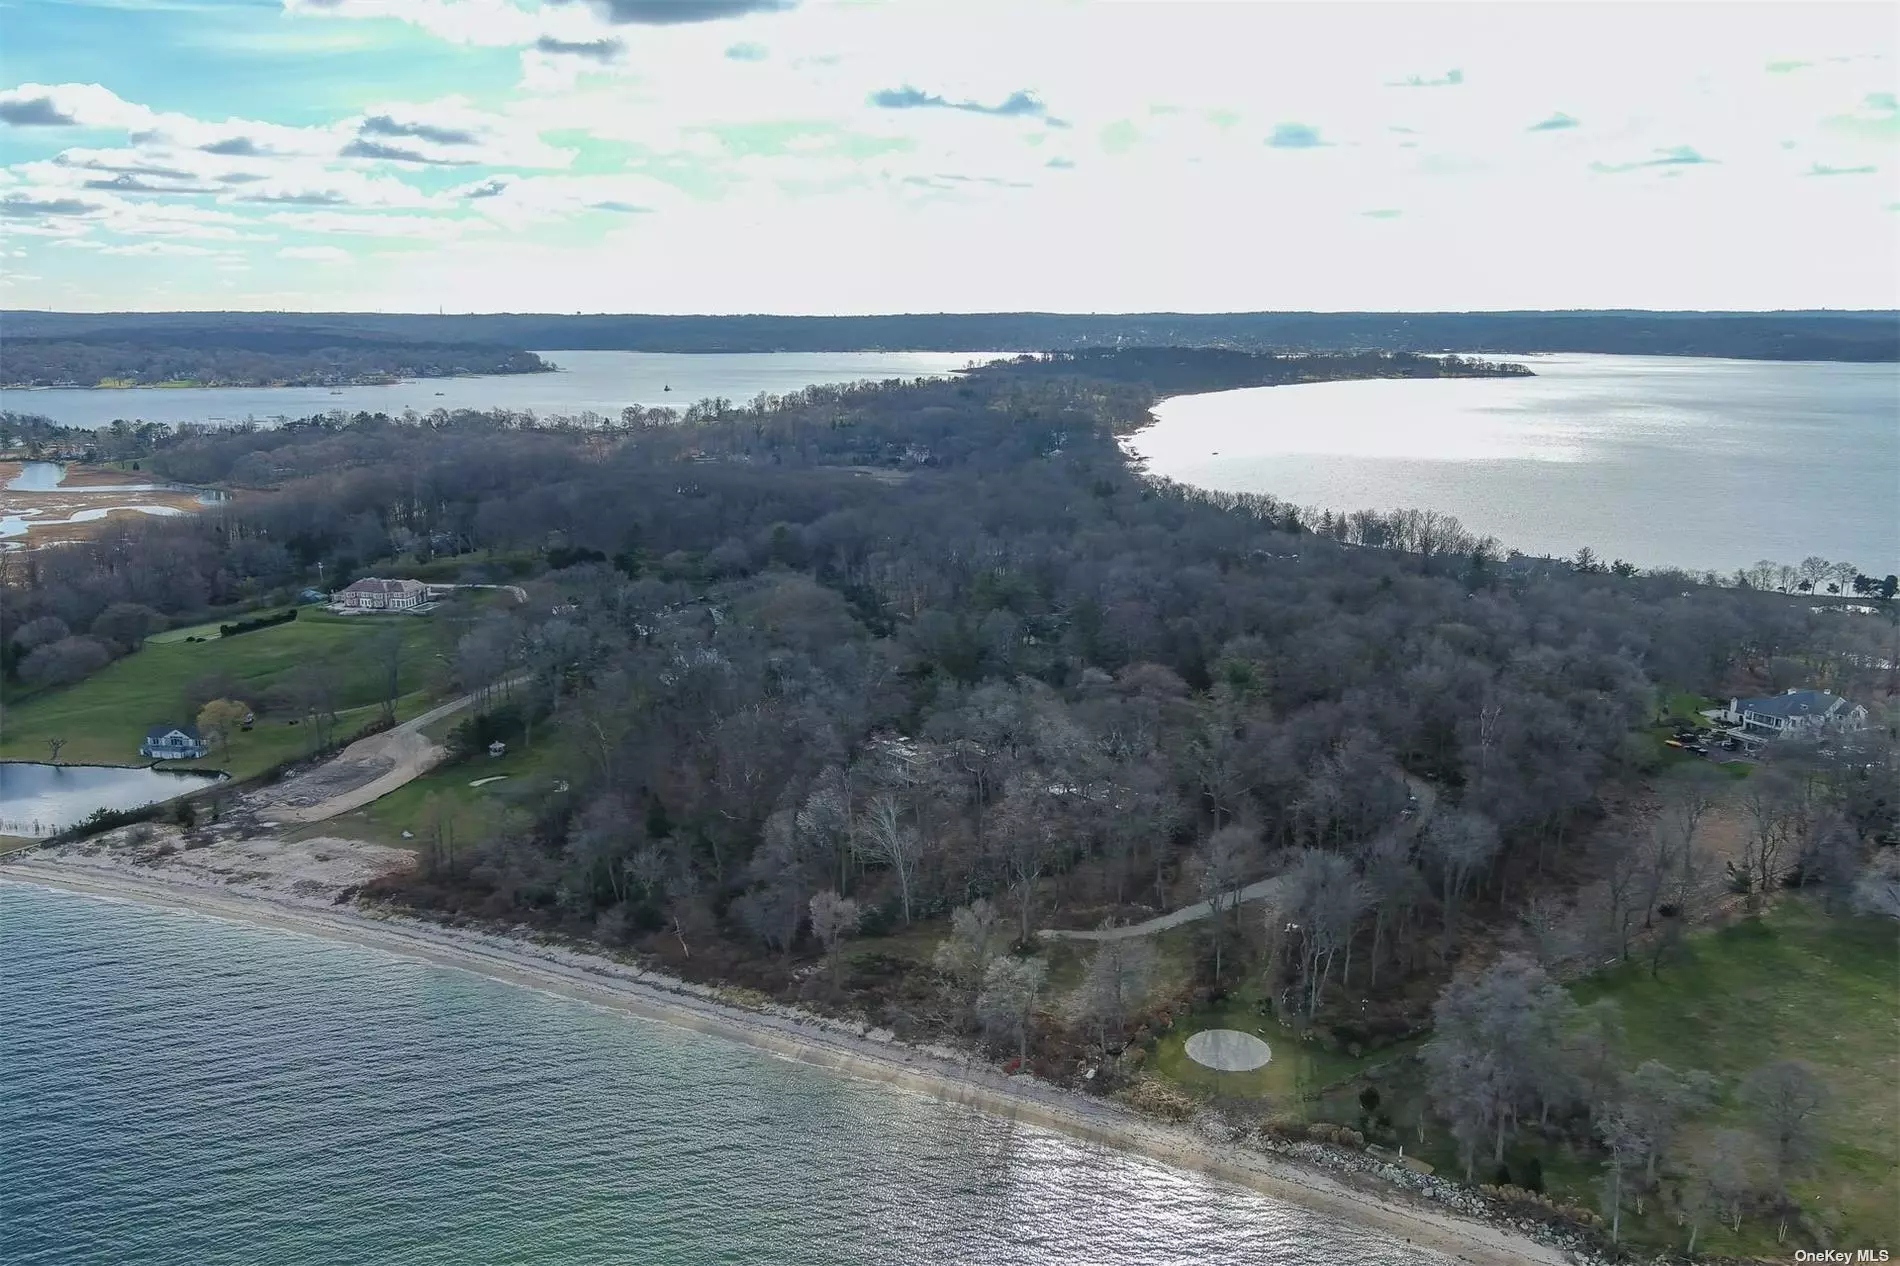 Amazing opportunity to own one of the largest open waterfront parcels on Centre Island with over 564.83 feet of sandy beach. Currently there are four buildings on the property, a main house, pool house, and garage by Ben Thompson of (TAC) and a 2.5 bedroom caretaker&rsquo;s ranch. **All buildings except the caretaker&rsquo;s ranch are in need of a full restoration.** Watch the sunrise over Long Island Sound and the mouth of Oyster Bay from this pristine property. There are many improvements/utilities including public water & electric, dec approved plans for a 200sf boat house. Two ways to access the property from Centre Island Road. Potential for subdivision.